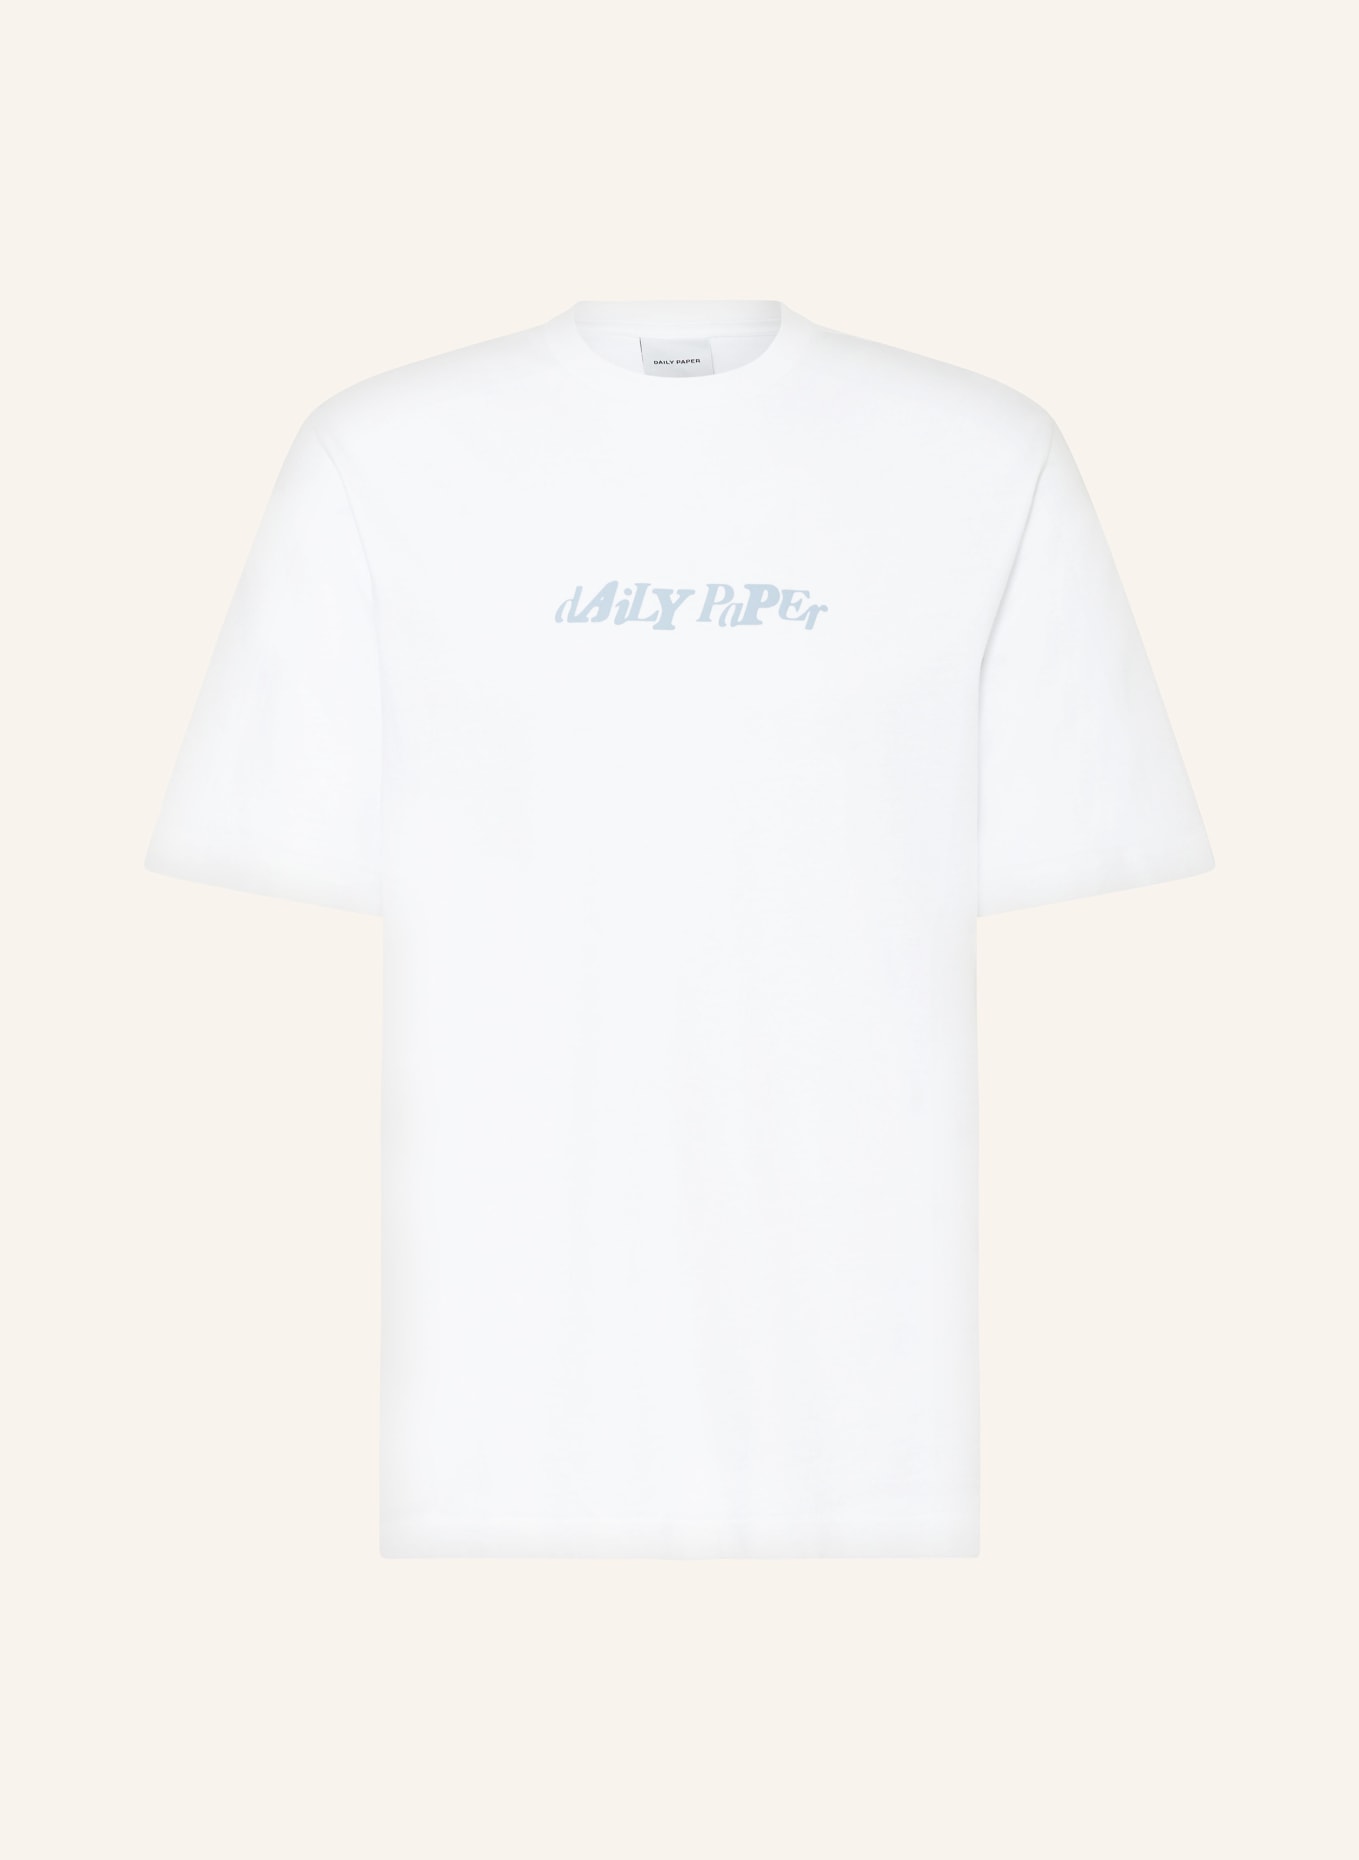 DAILY PAPER T-shirt UNIFIED TYPE, Color: WHITE (Image 1)